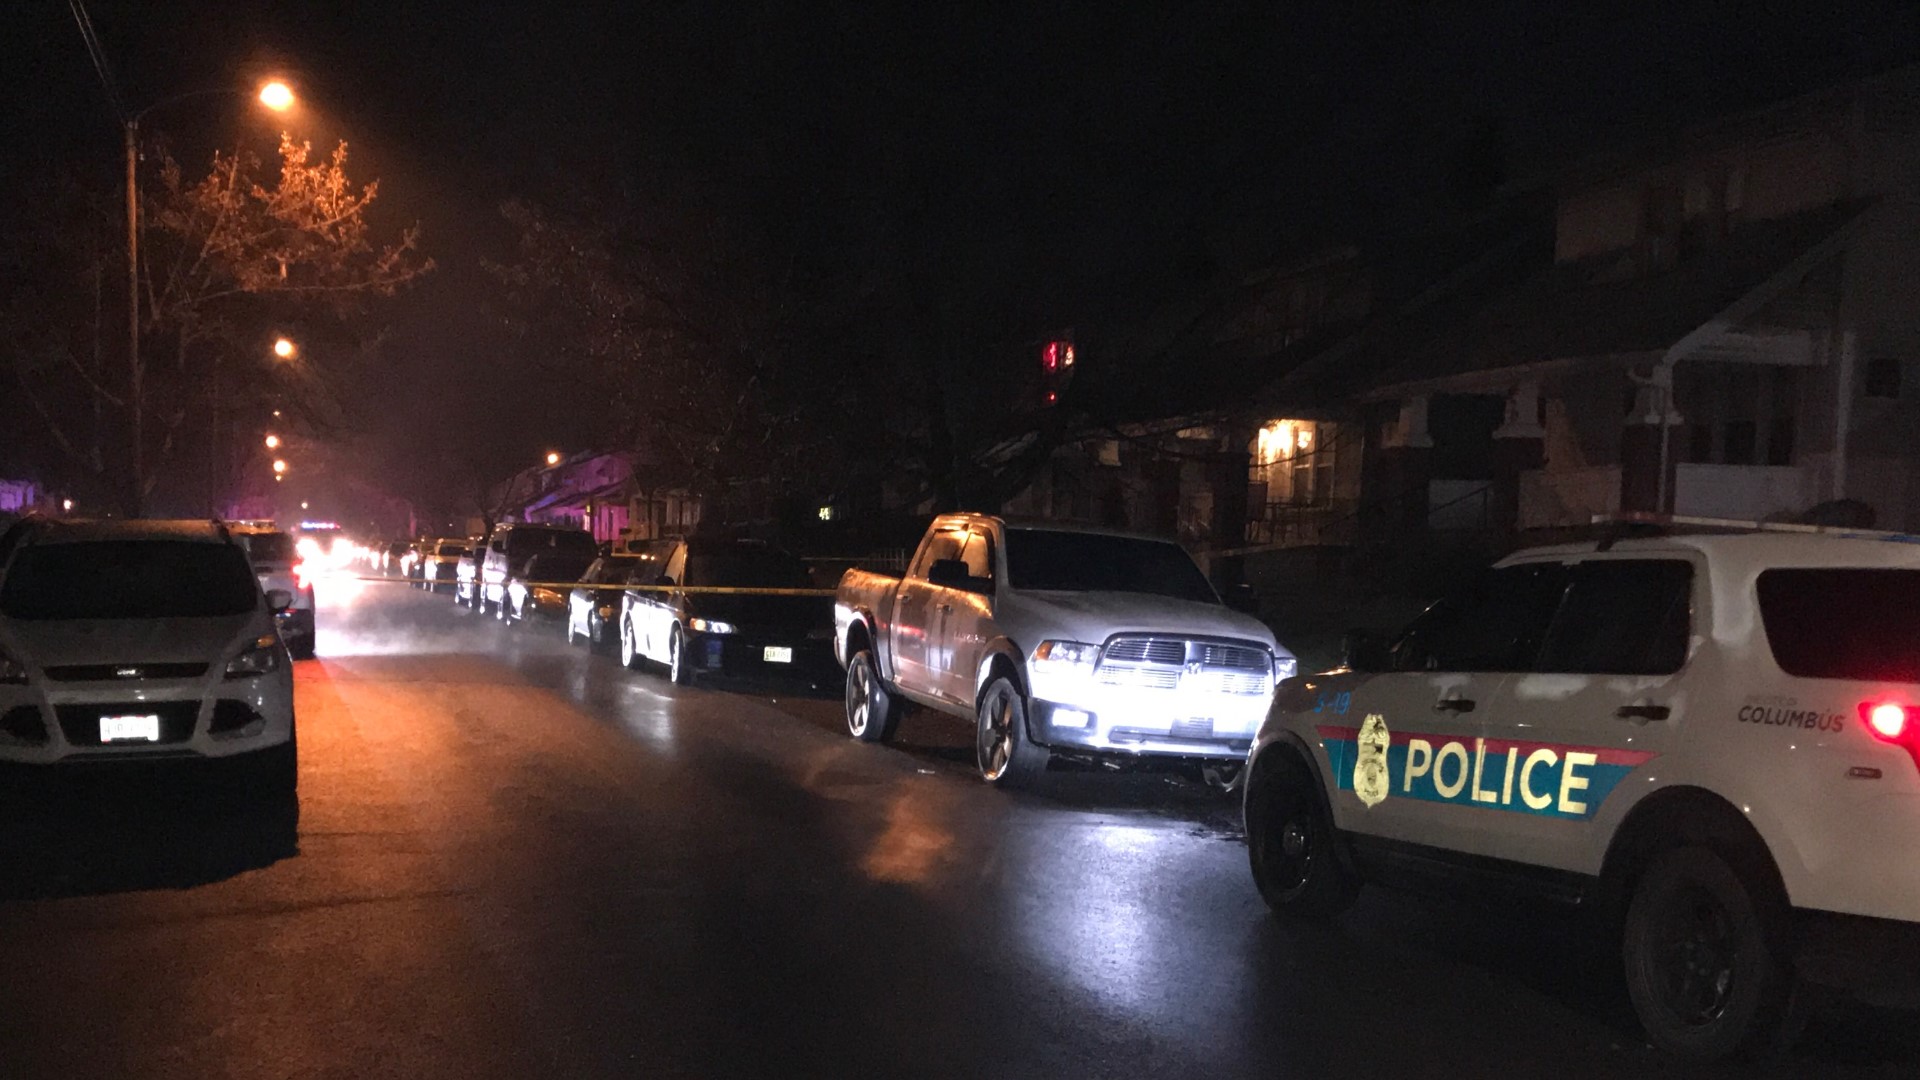 The shooting happened on the 600 block of South Terrace Avenue just before 1 a.m., according to Columbus police.